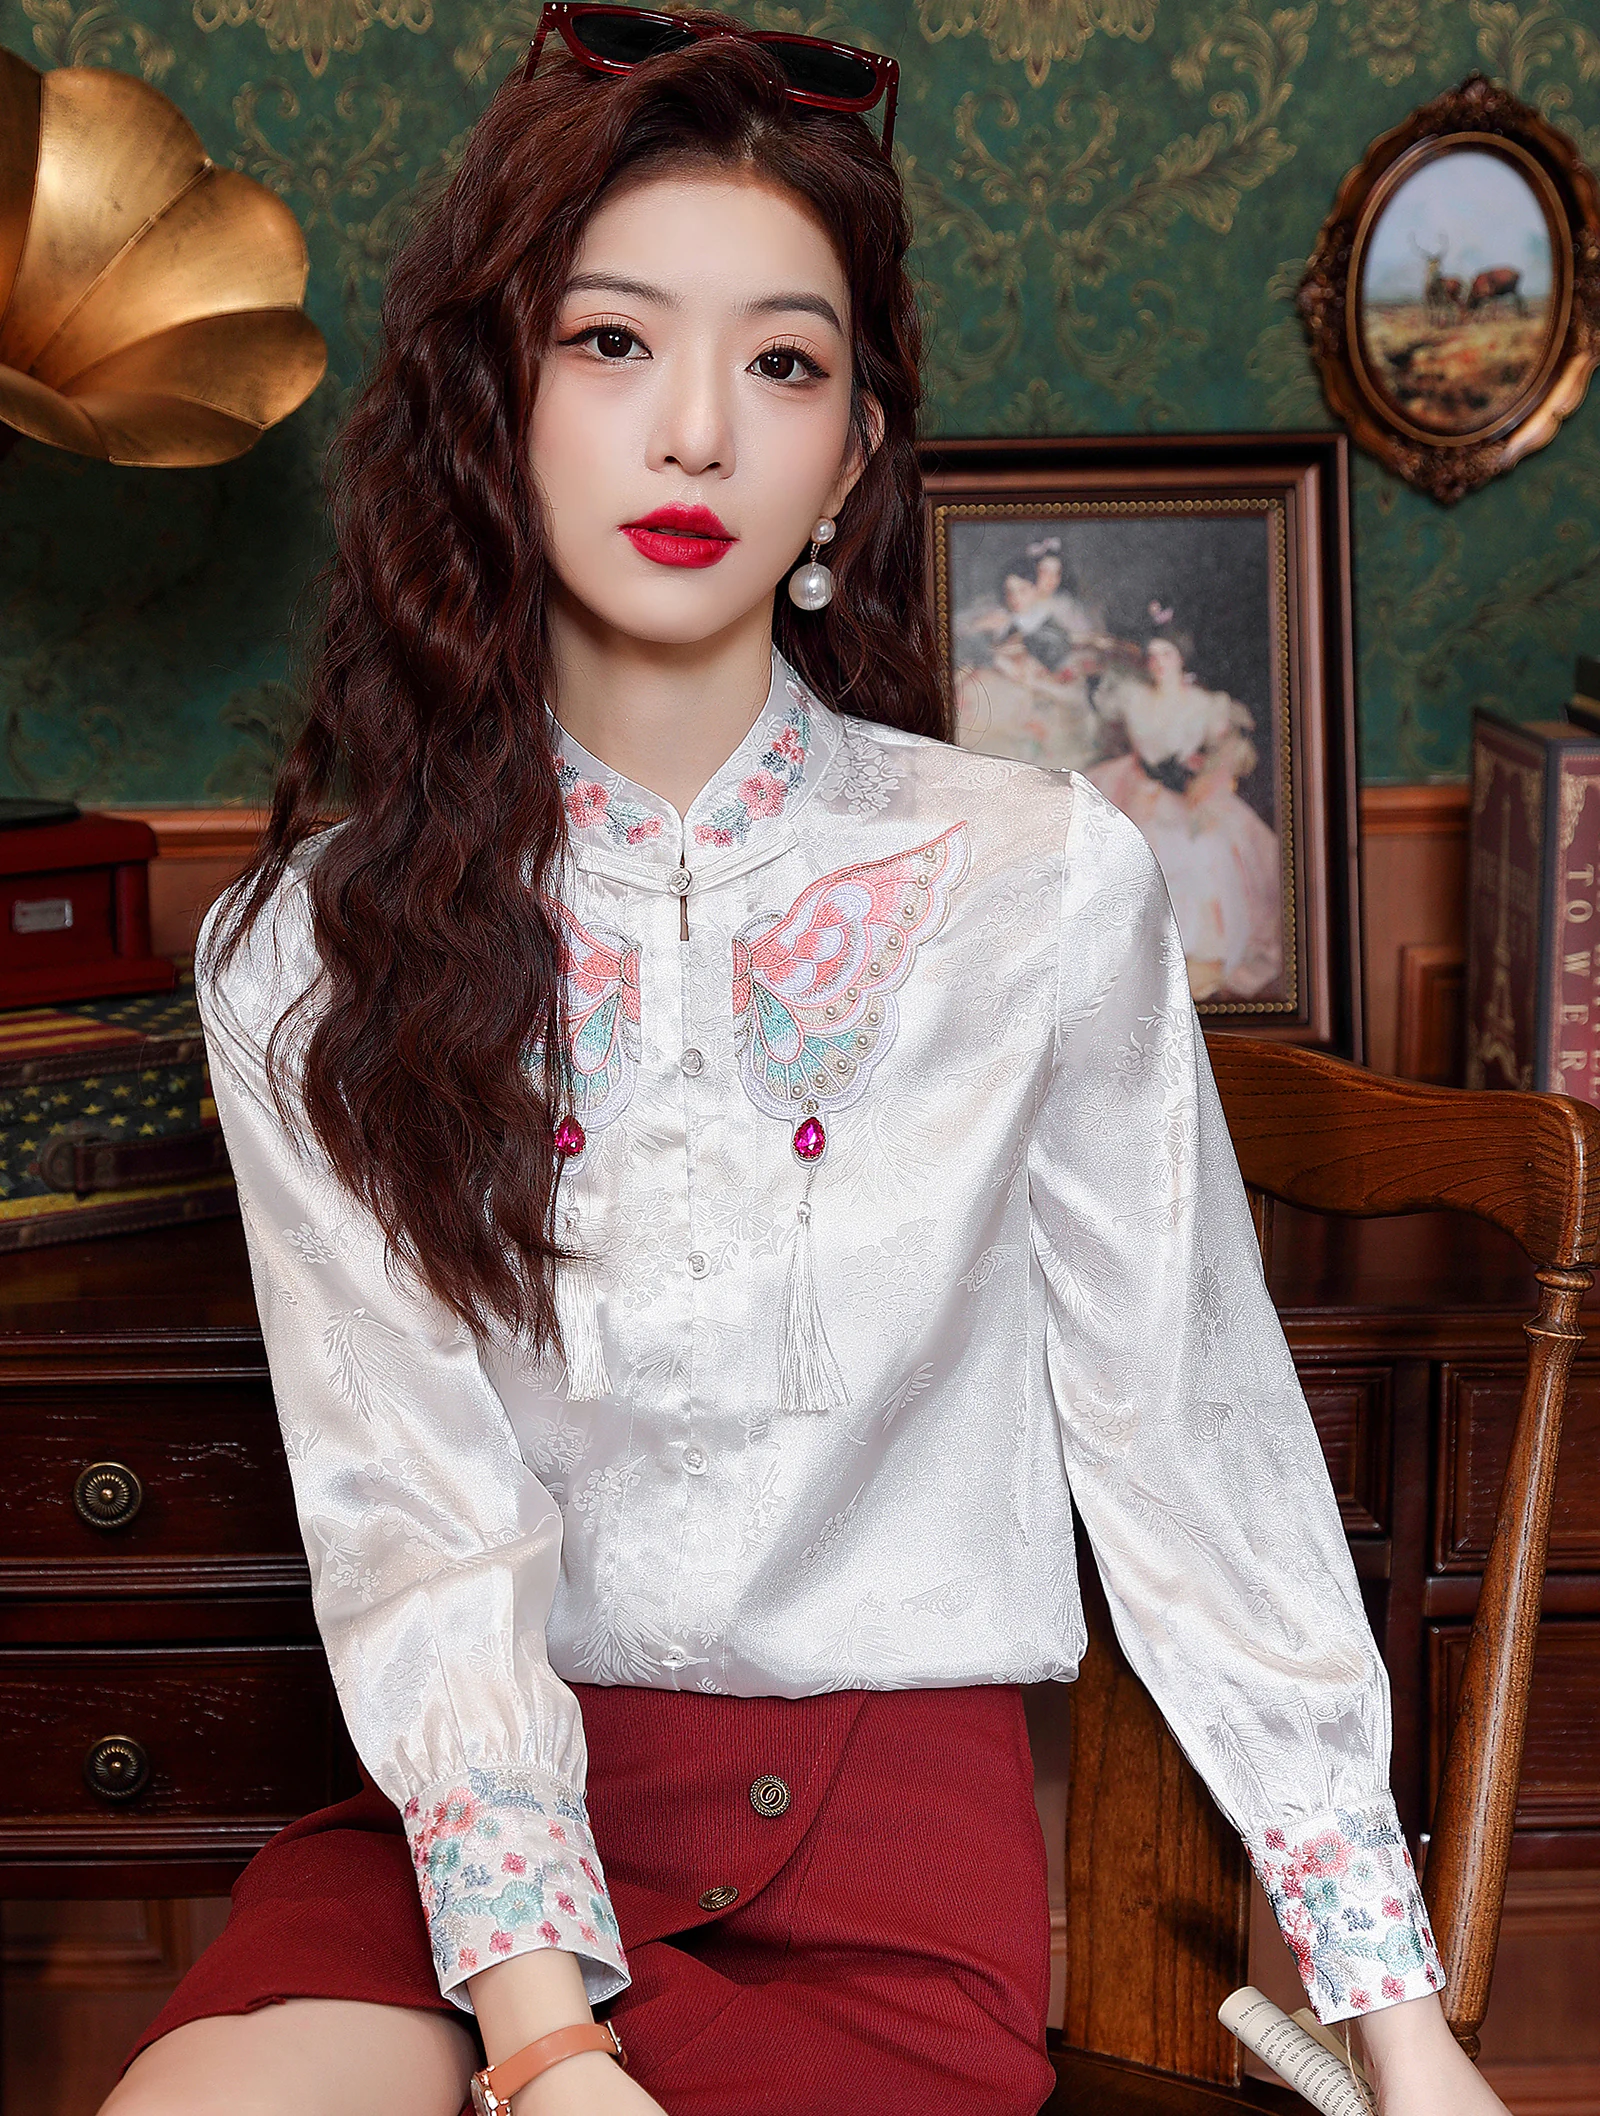 Women Classy Butterfly Embroidery Jacquard Satin Shirt Top Blouse02